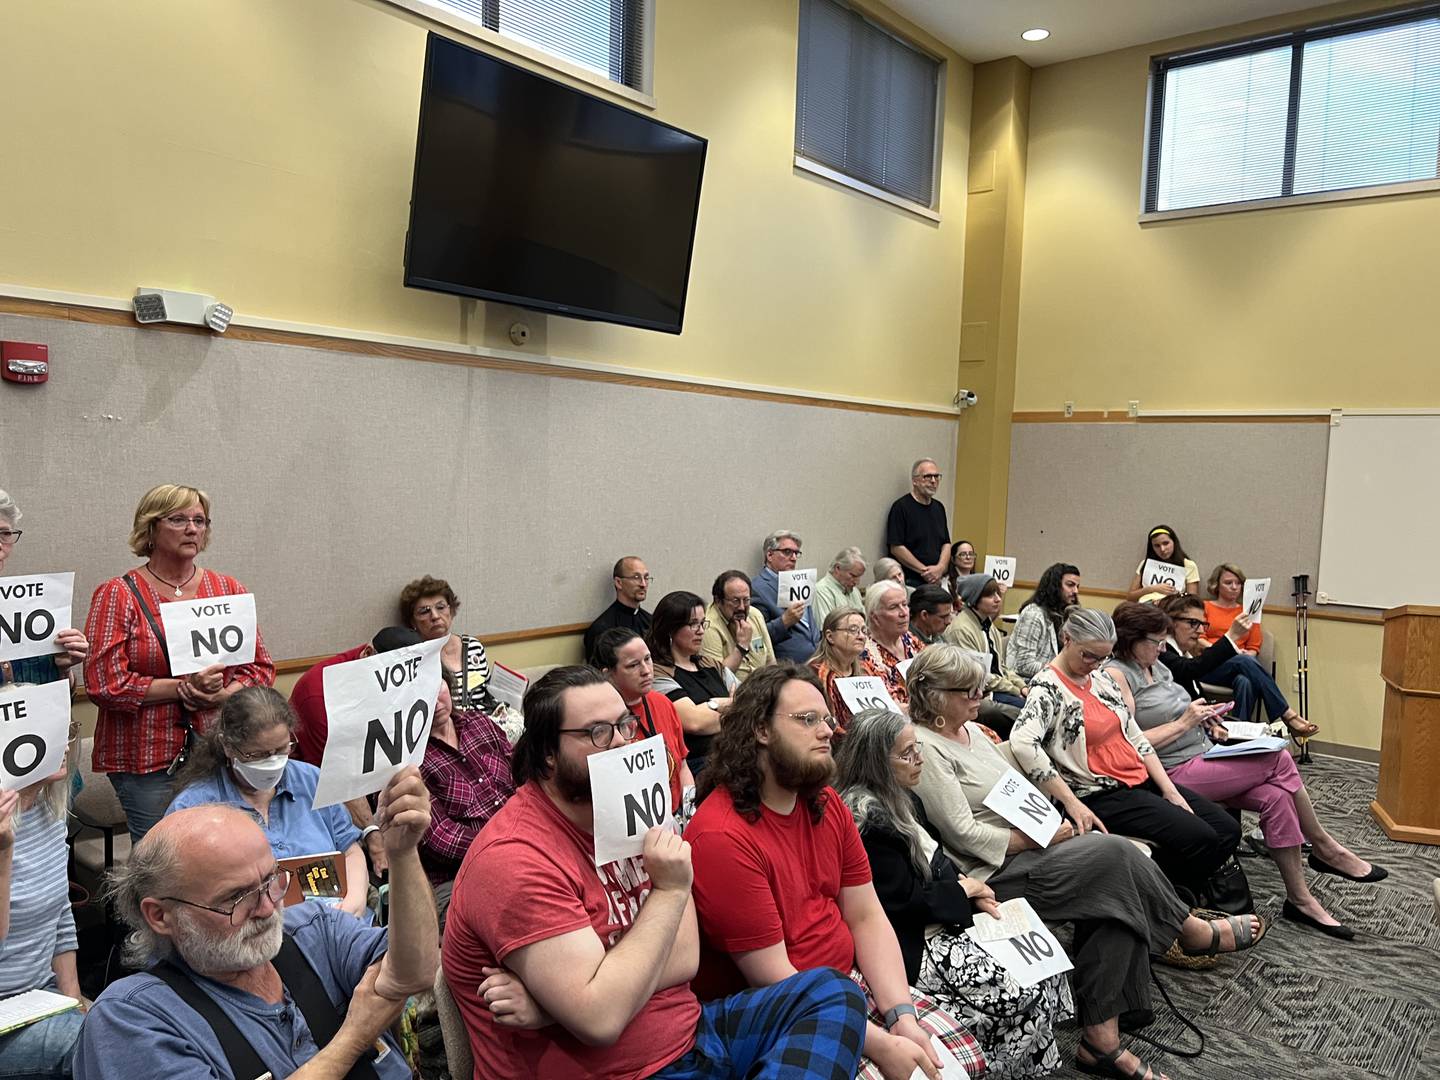 Many of those who attended the DeLalb County Board Law and Justice Committee meeting on May 20, 2024, holds signs that read, "vote no." The public display was in response to a proposed resolution that would have declared DeKalb County a non-sanctuary for asylum seekers during a DeKalb County Board Law and Justice Committee meeting at the Legislative Center in Sycamore on May 20, 2024. The resolution failed to garner enough committee votes to send it to the DeKalb County Board for approval.